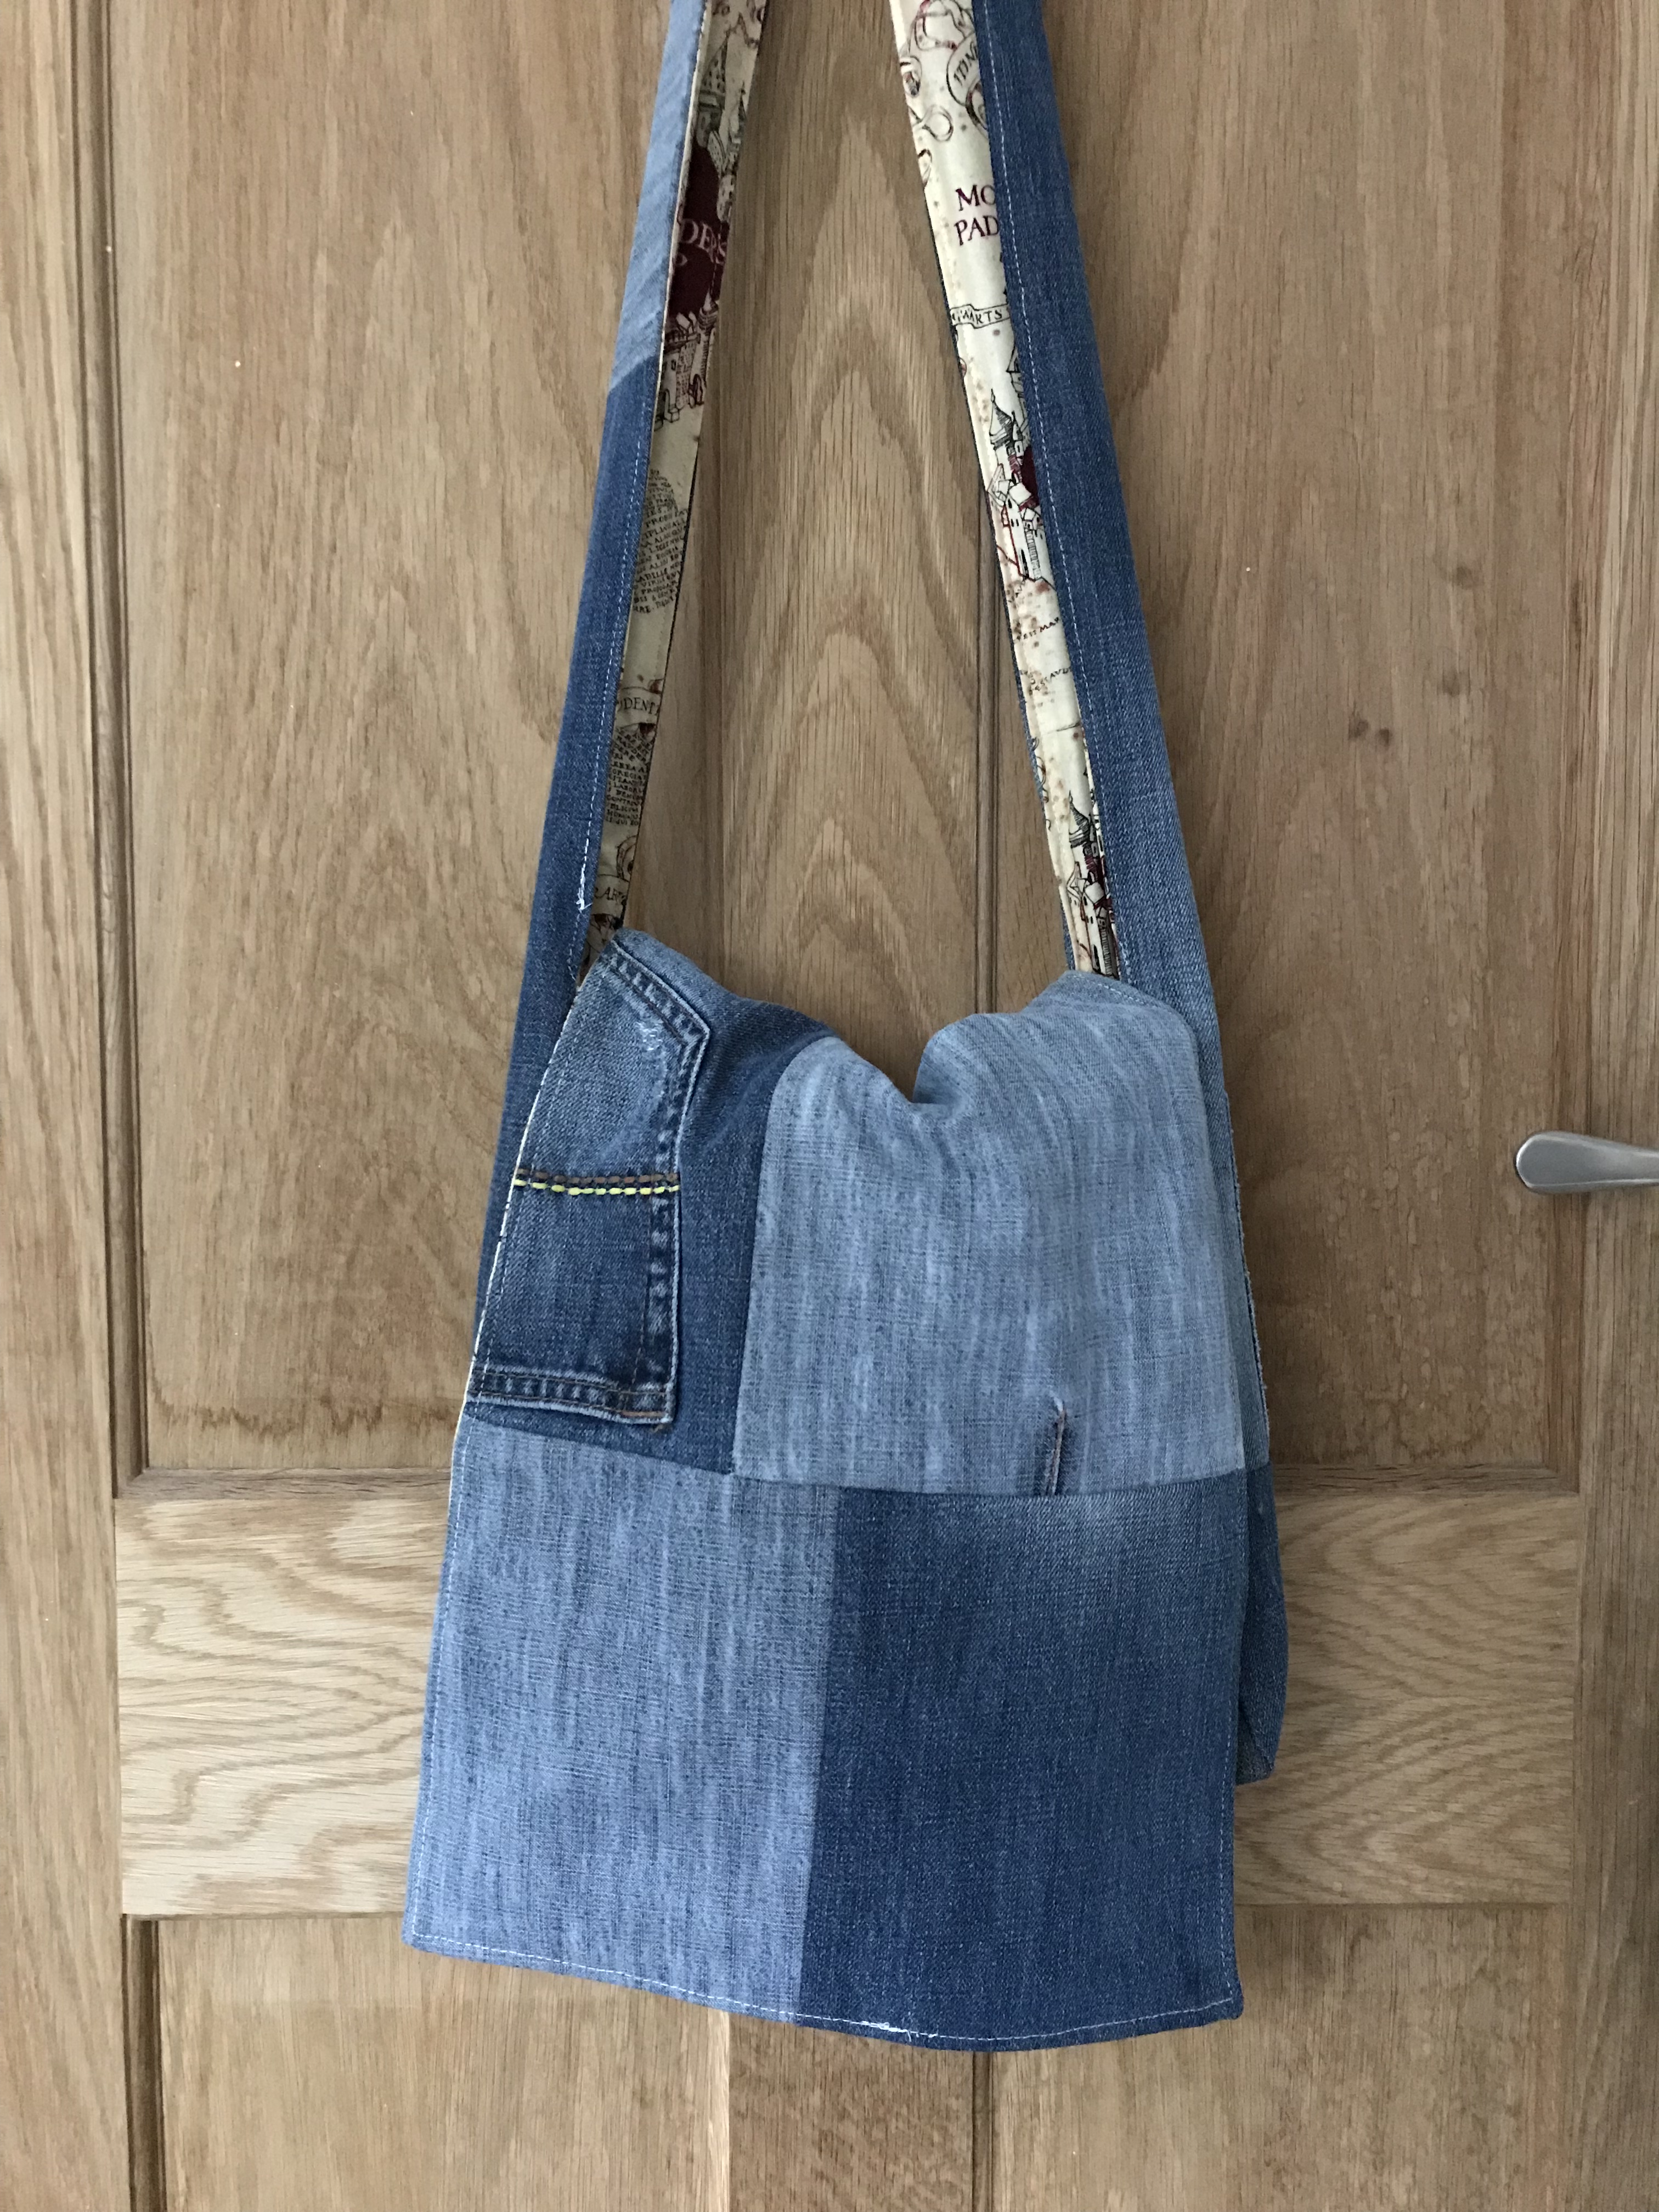 Handmade haven messenger bag, made with repurposed jeans